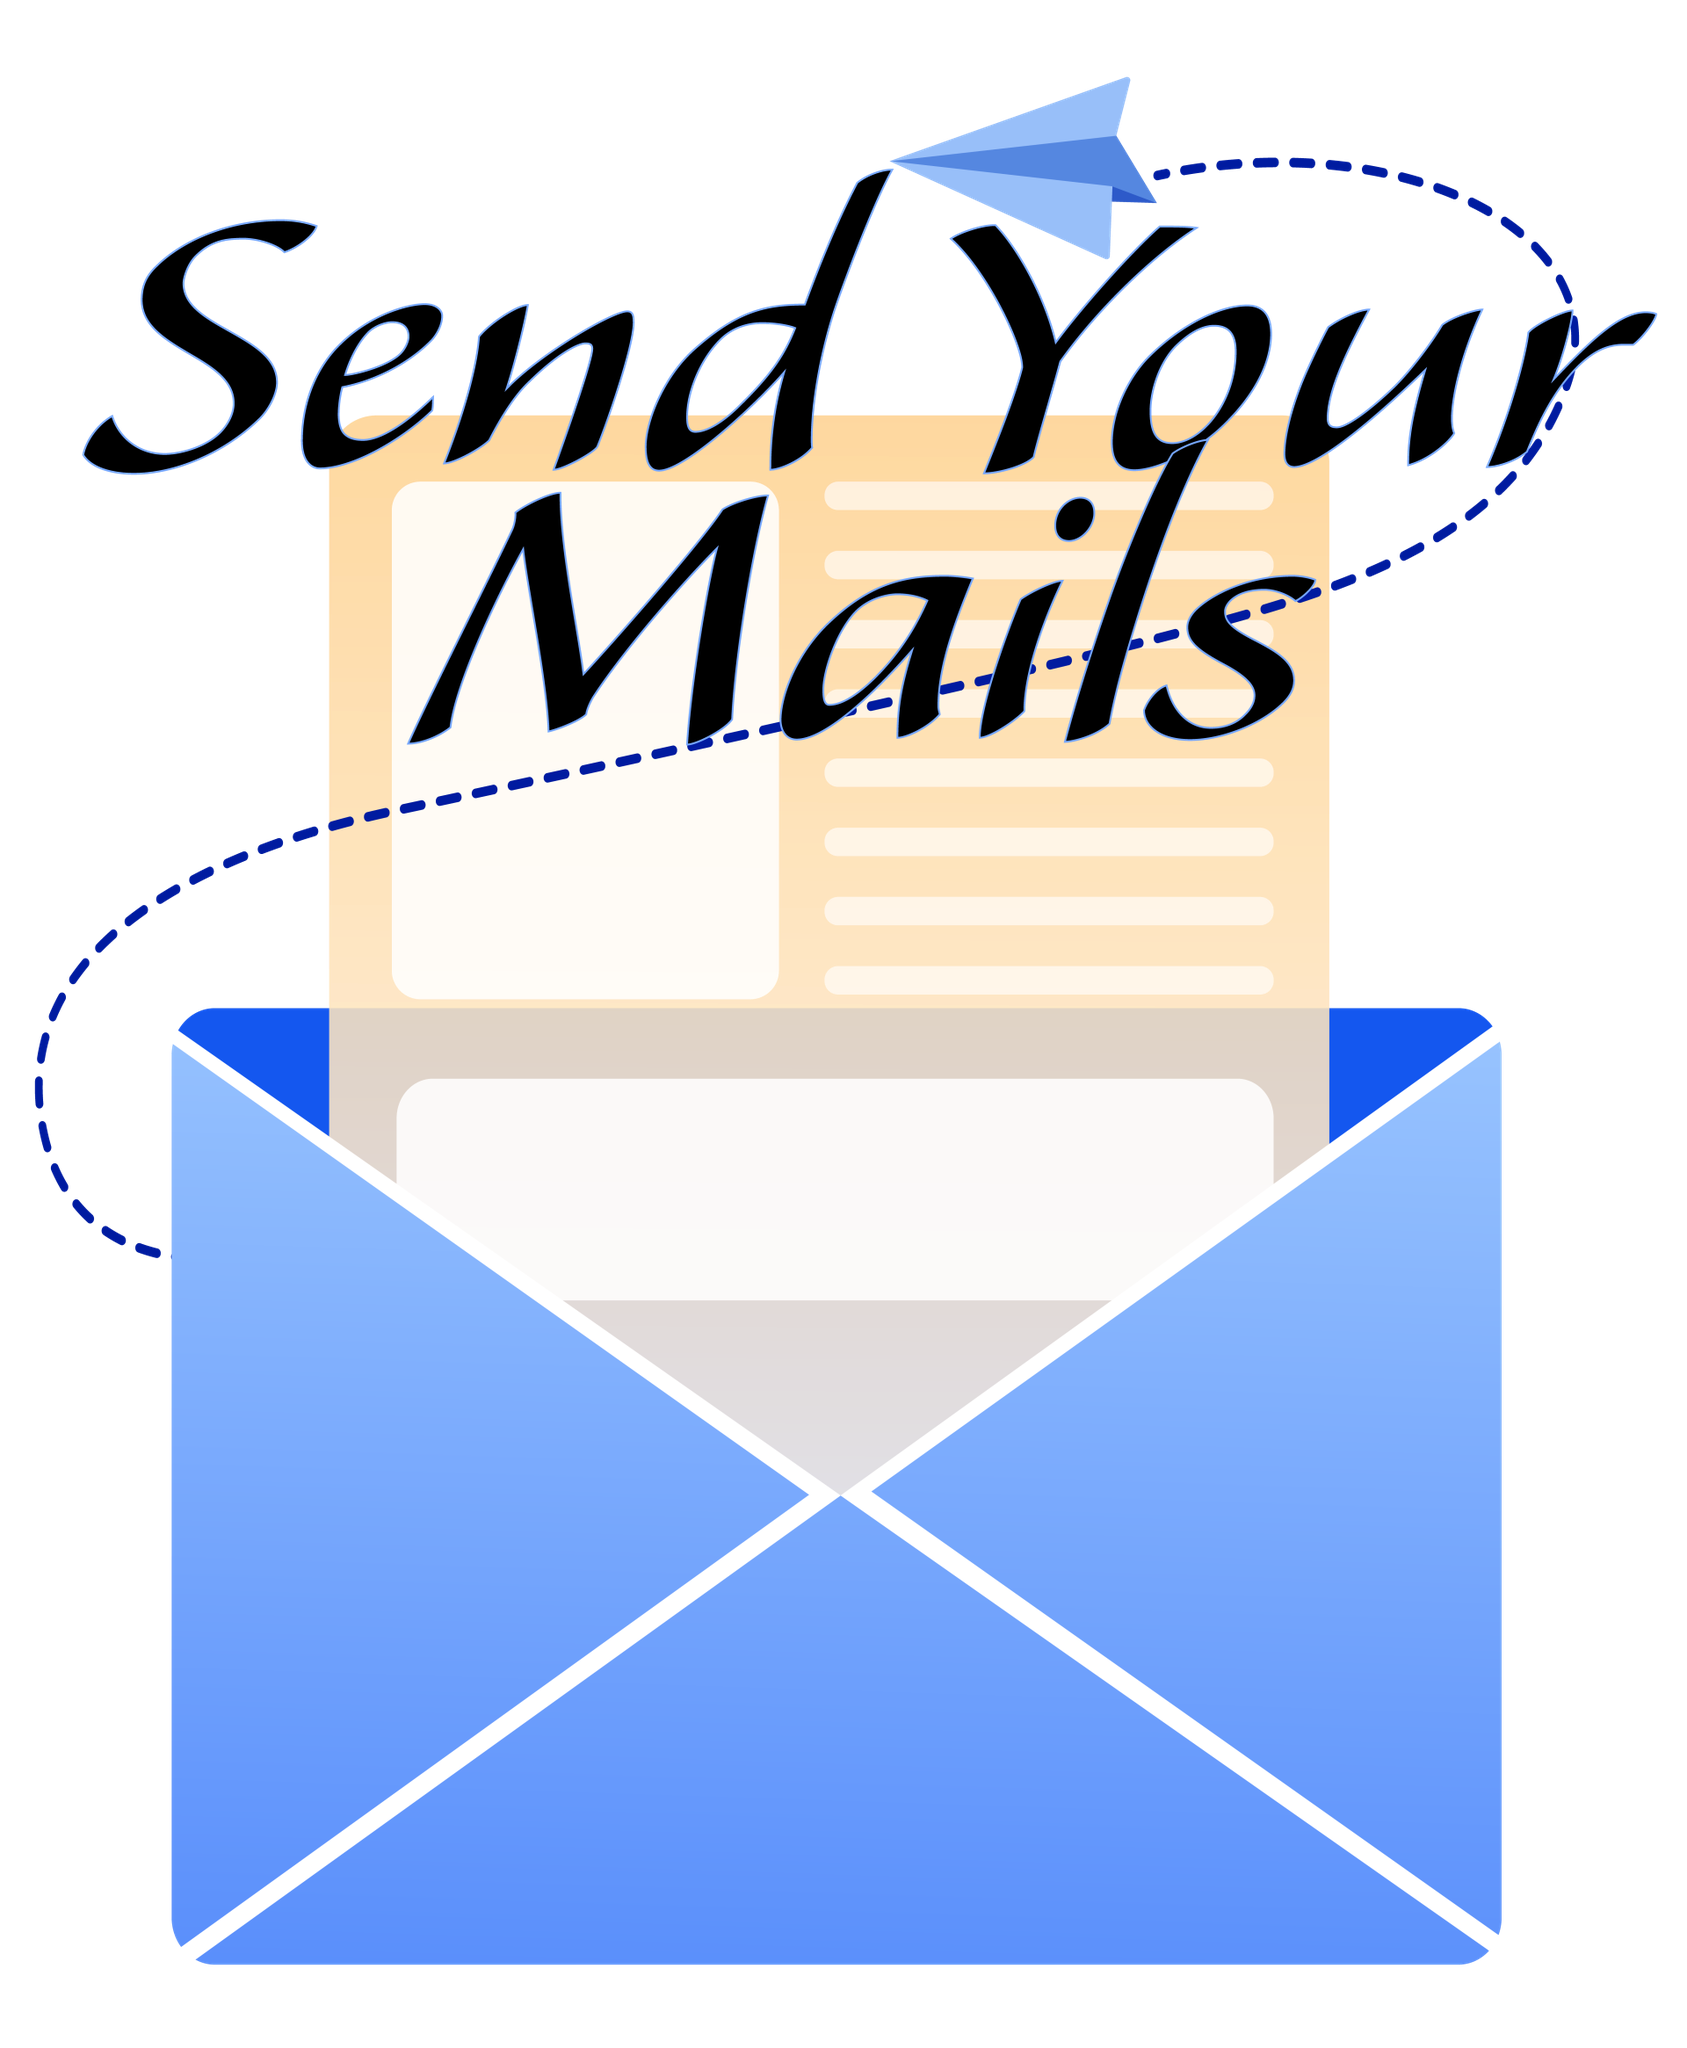 Send Your Mails